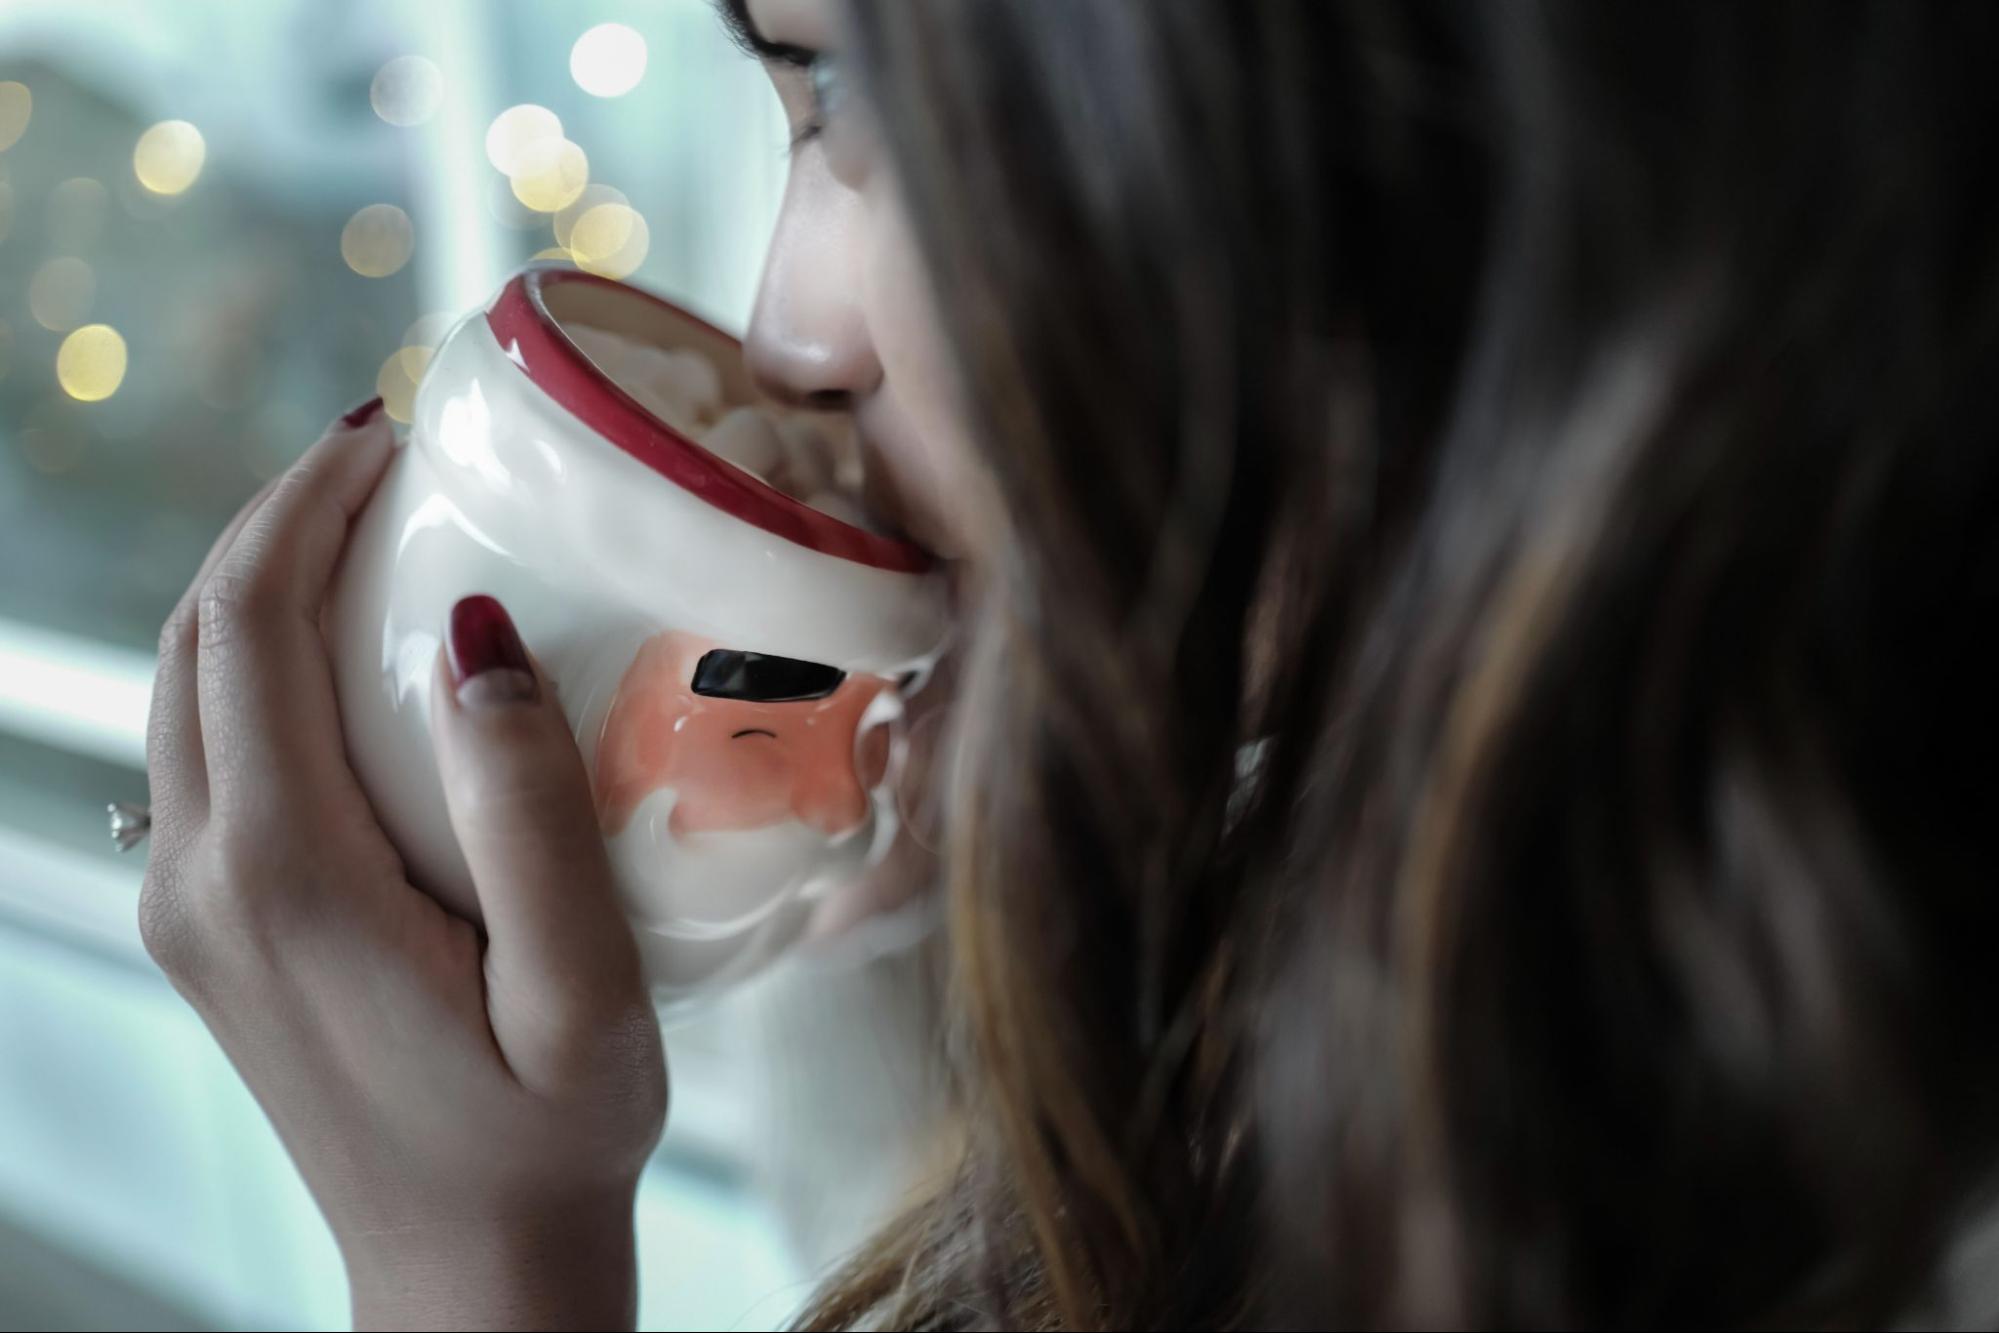 An engaged woman sips hot chocolate out of a Santa mug while watching the lights.